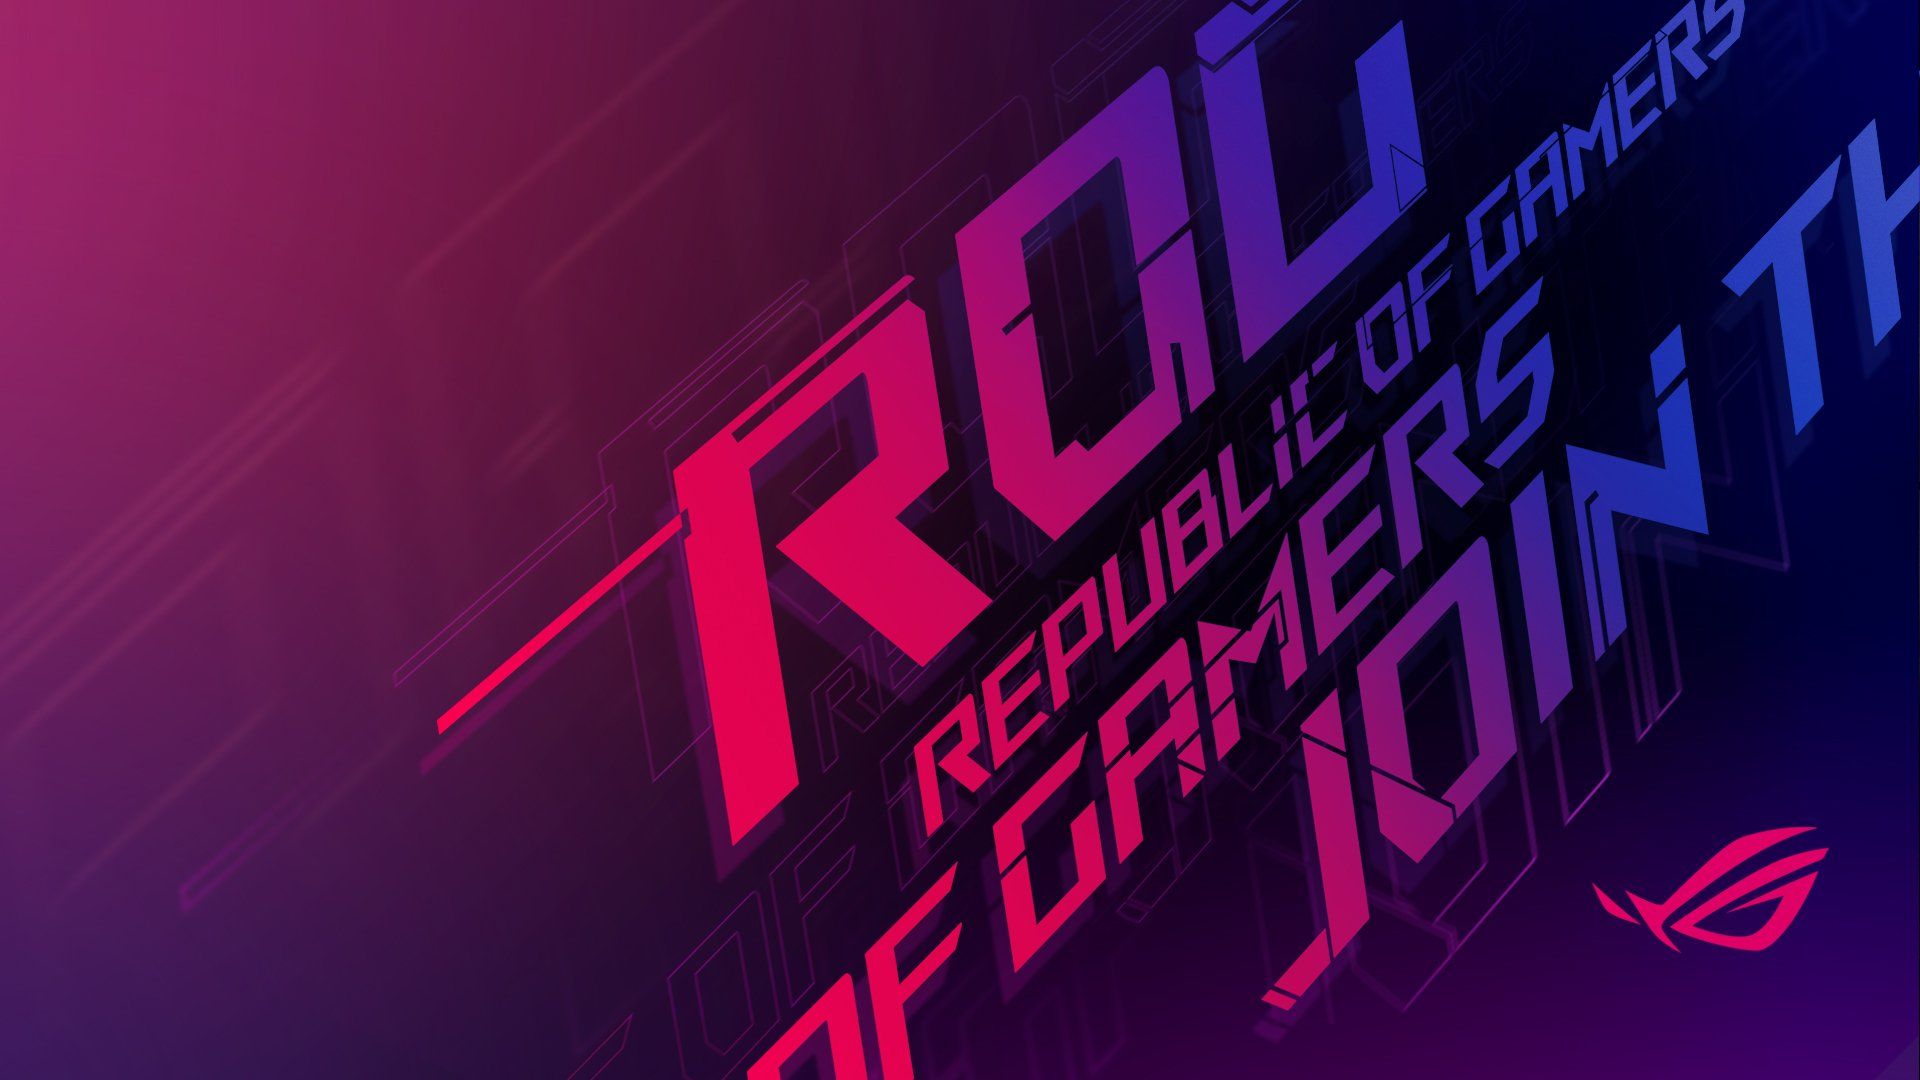 ROG Global've had a lot of requests regarding our most recent #ROG #STRIX wallpaper. It's now been added to our website for everyone to download !